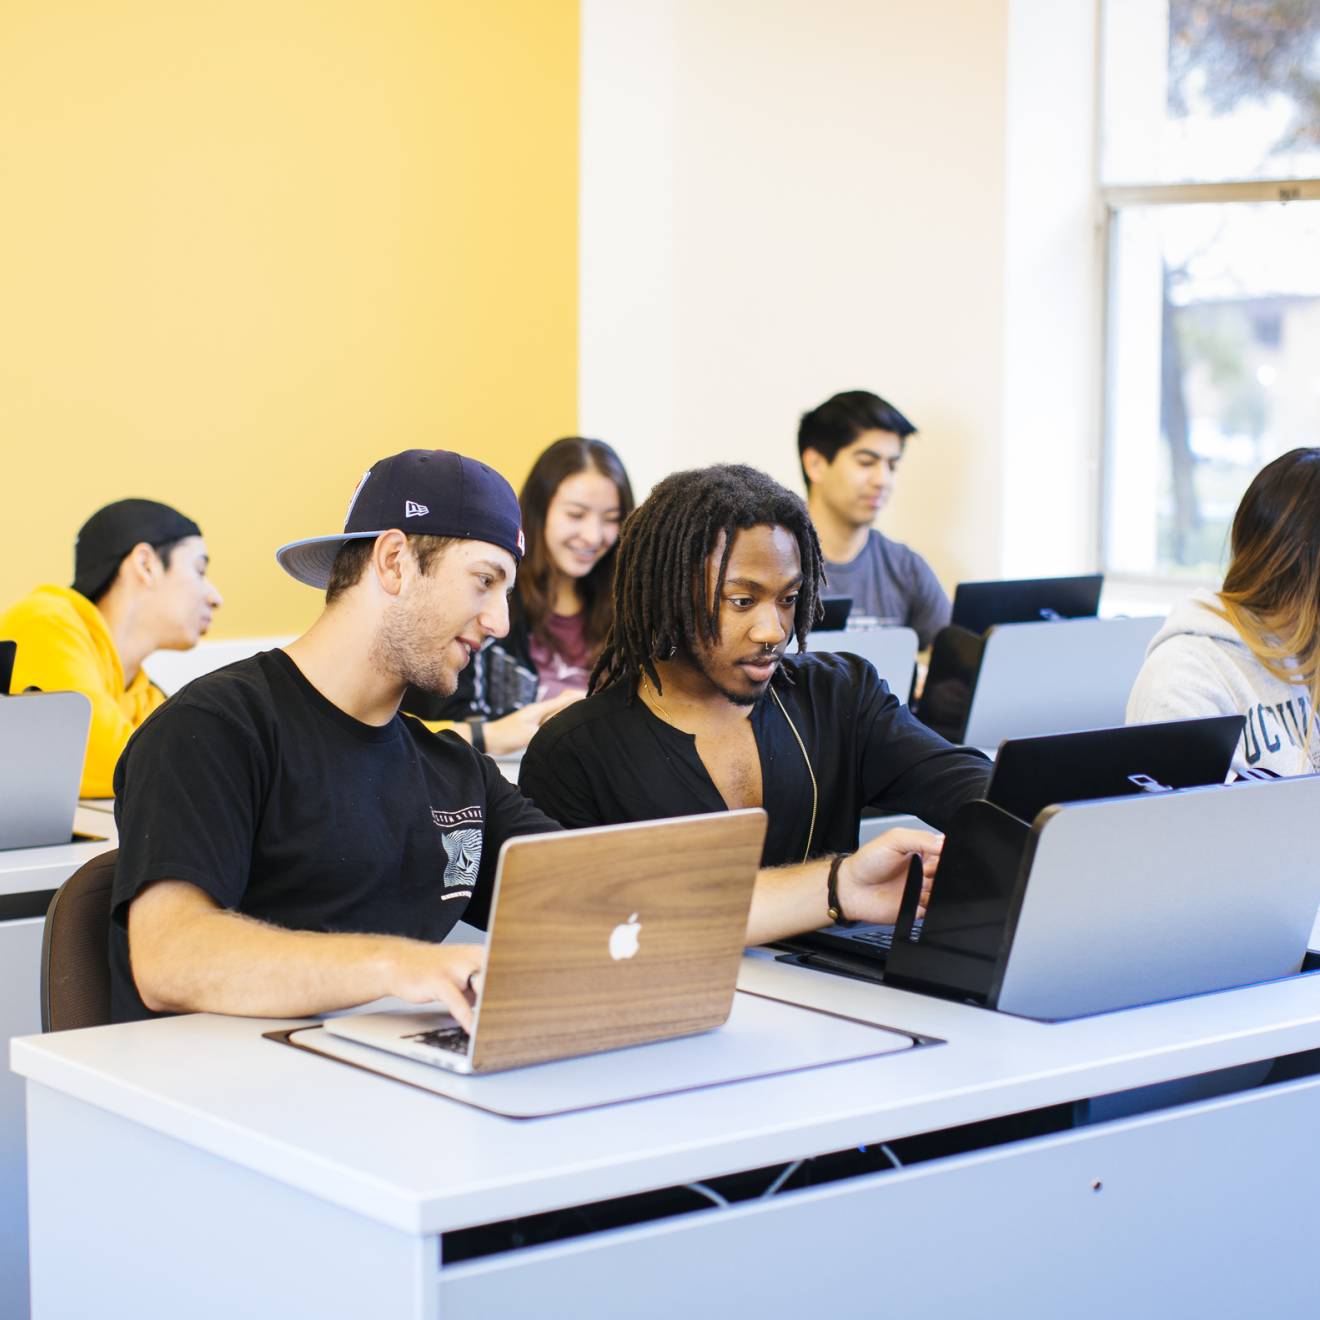 Diverse students looking at computers together in a classroom